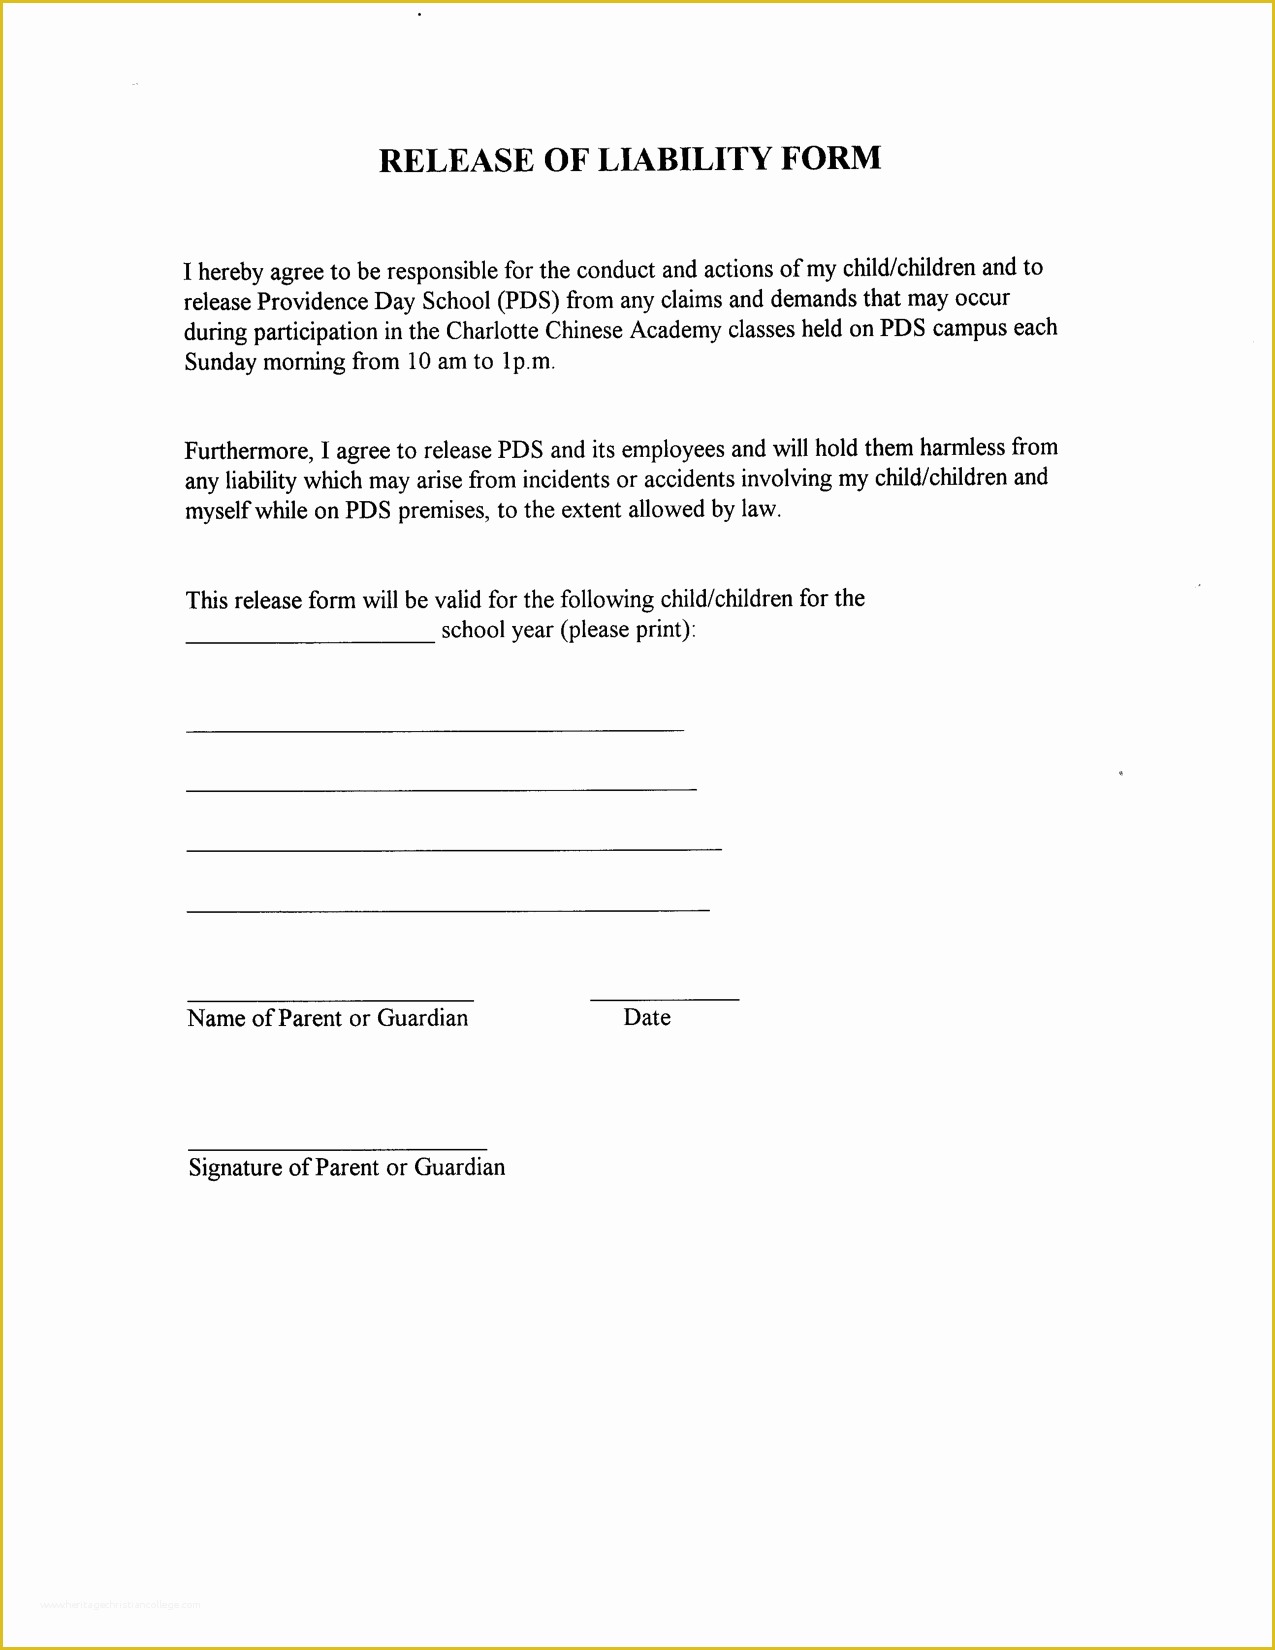 free-liability-release-form-template-of-liability-release-form-template